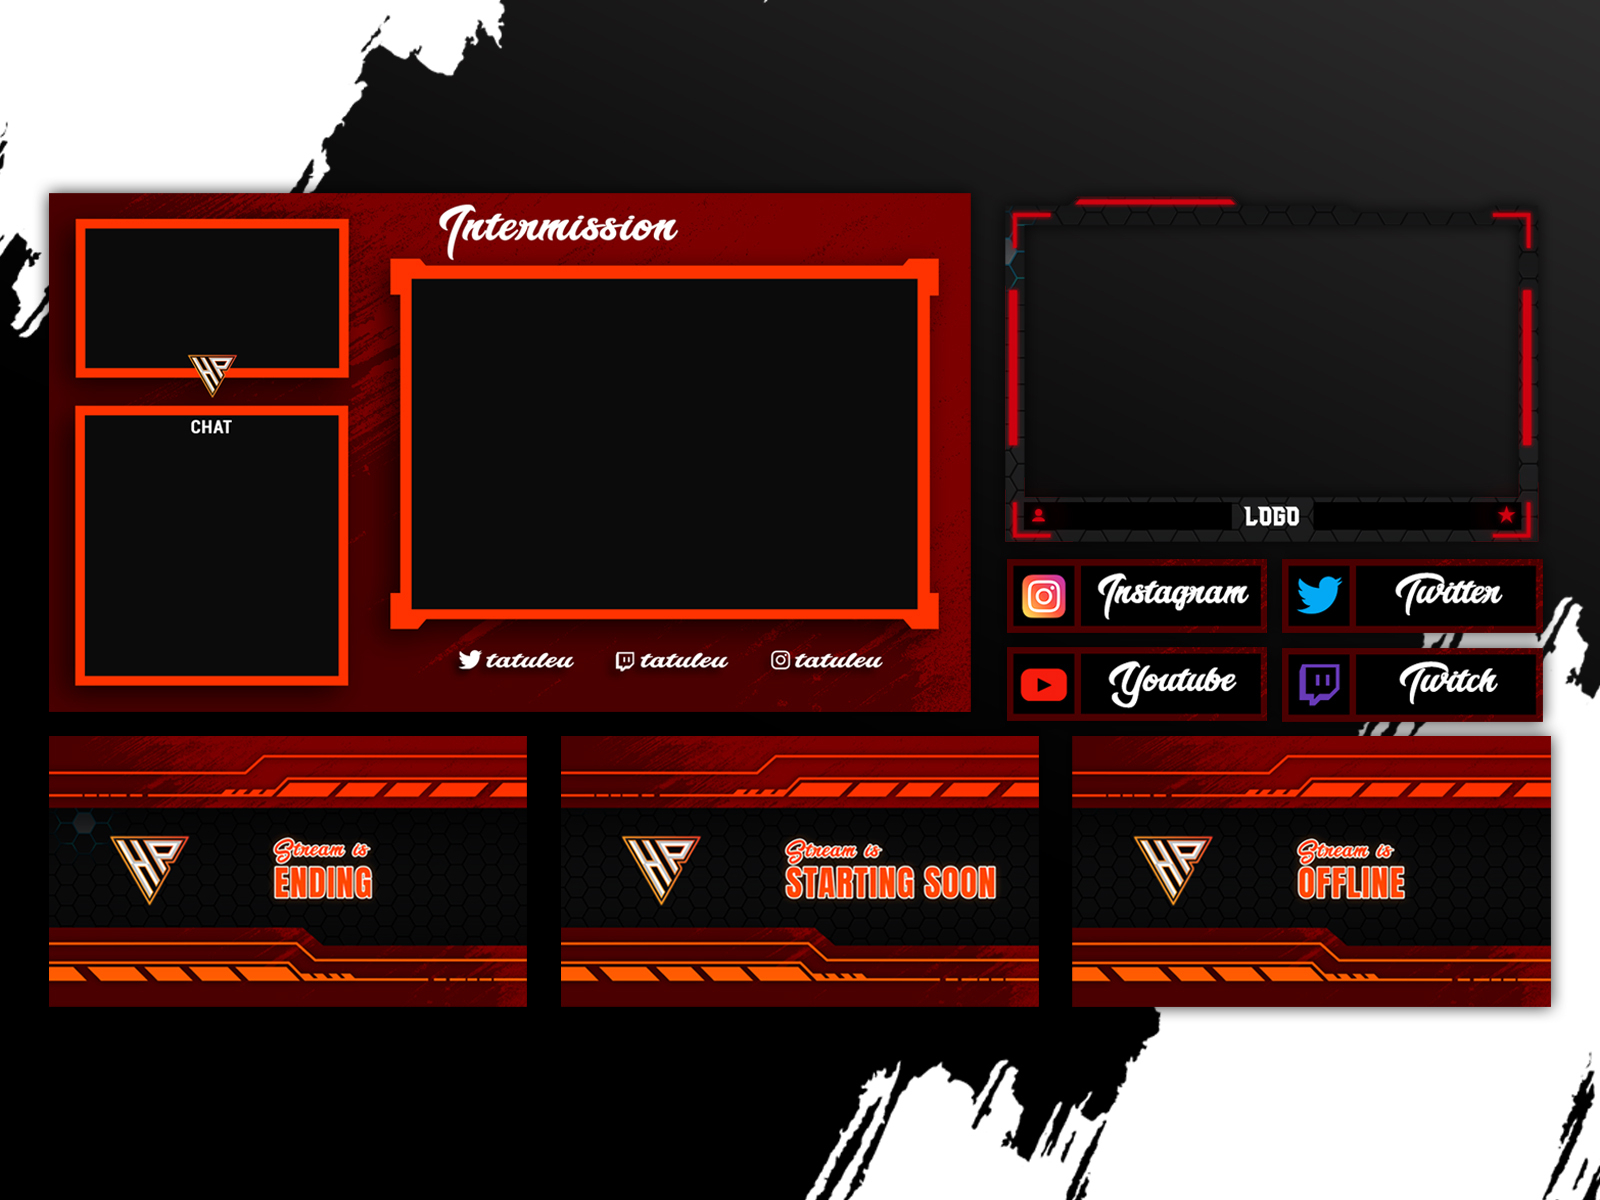 Red stream overlay packages by Logo intro & twitch GFX Designer on Dribbble